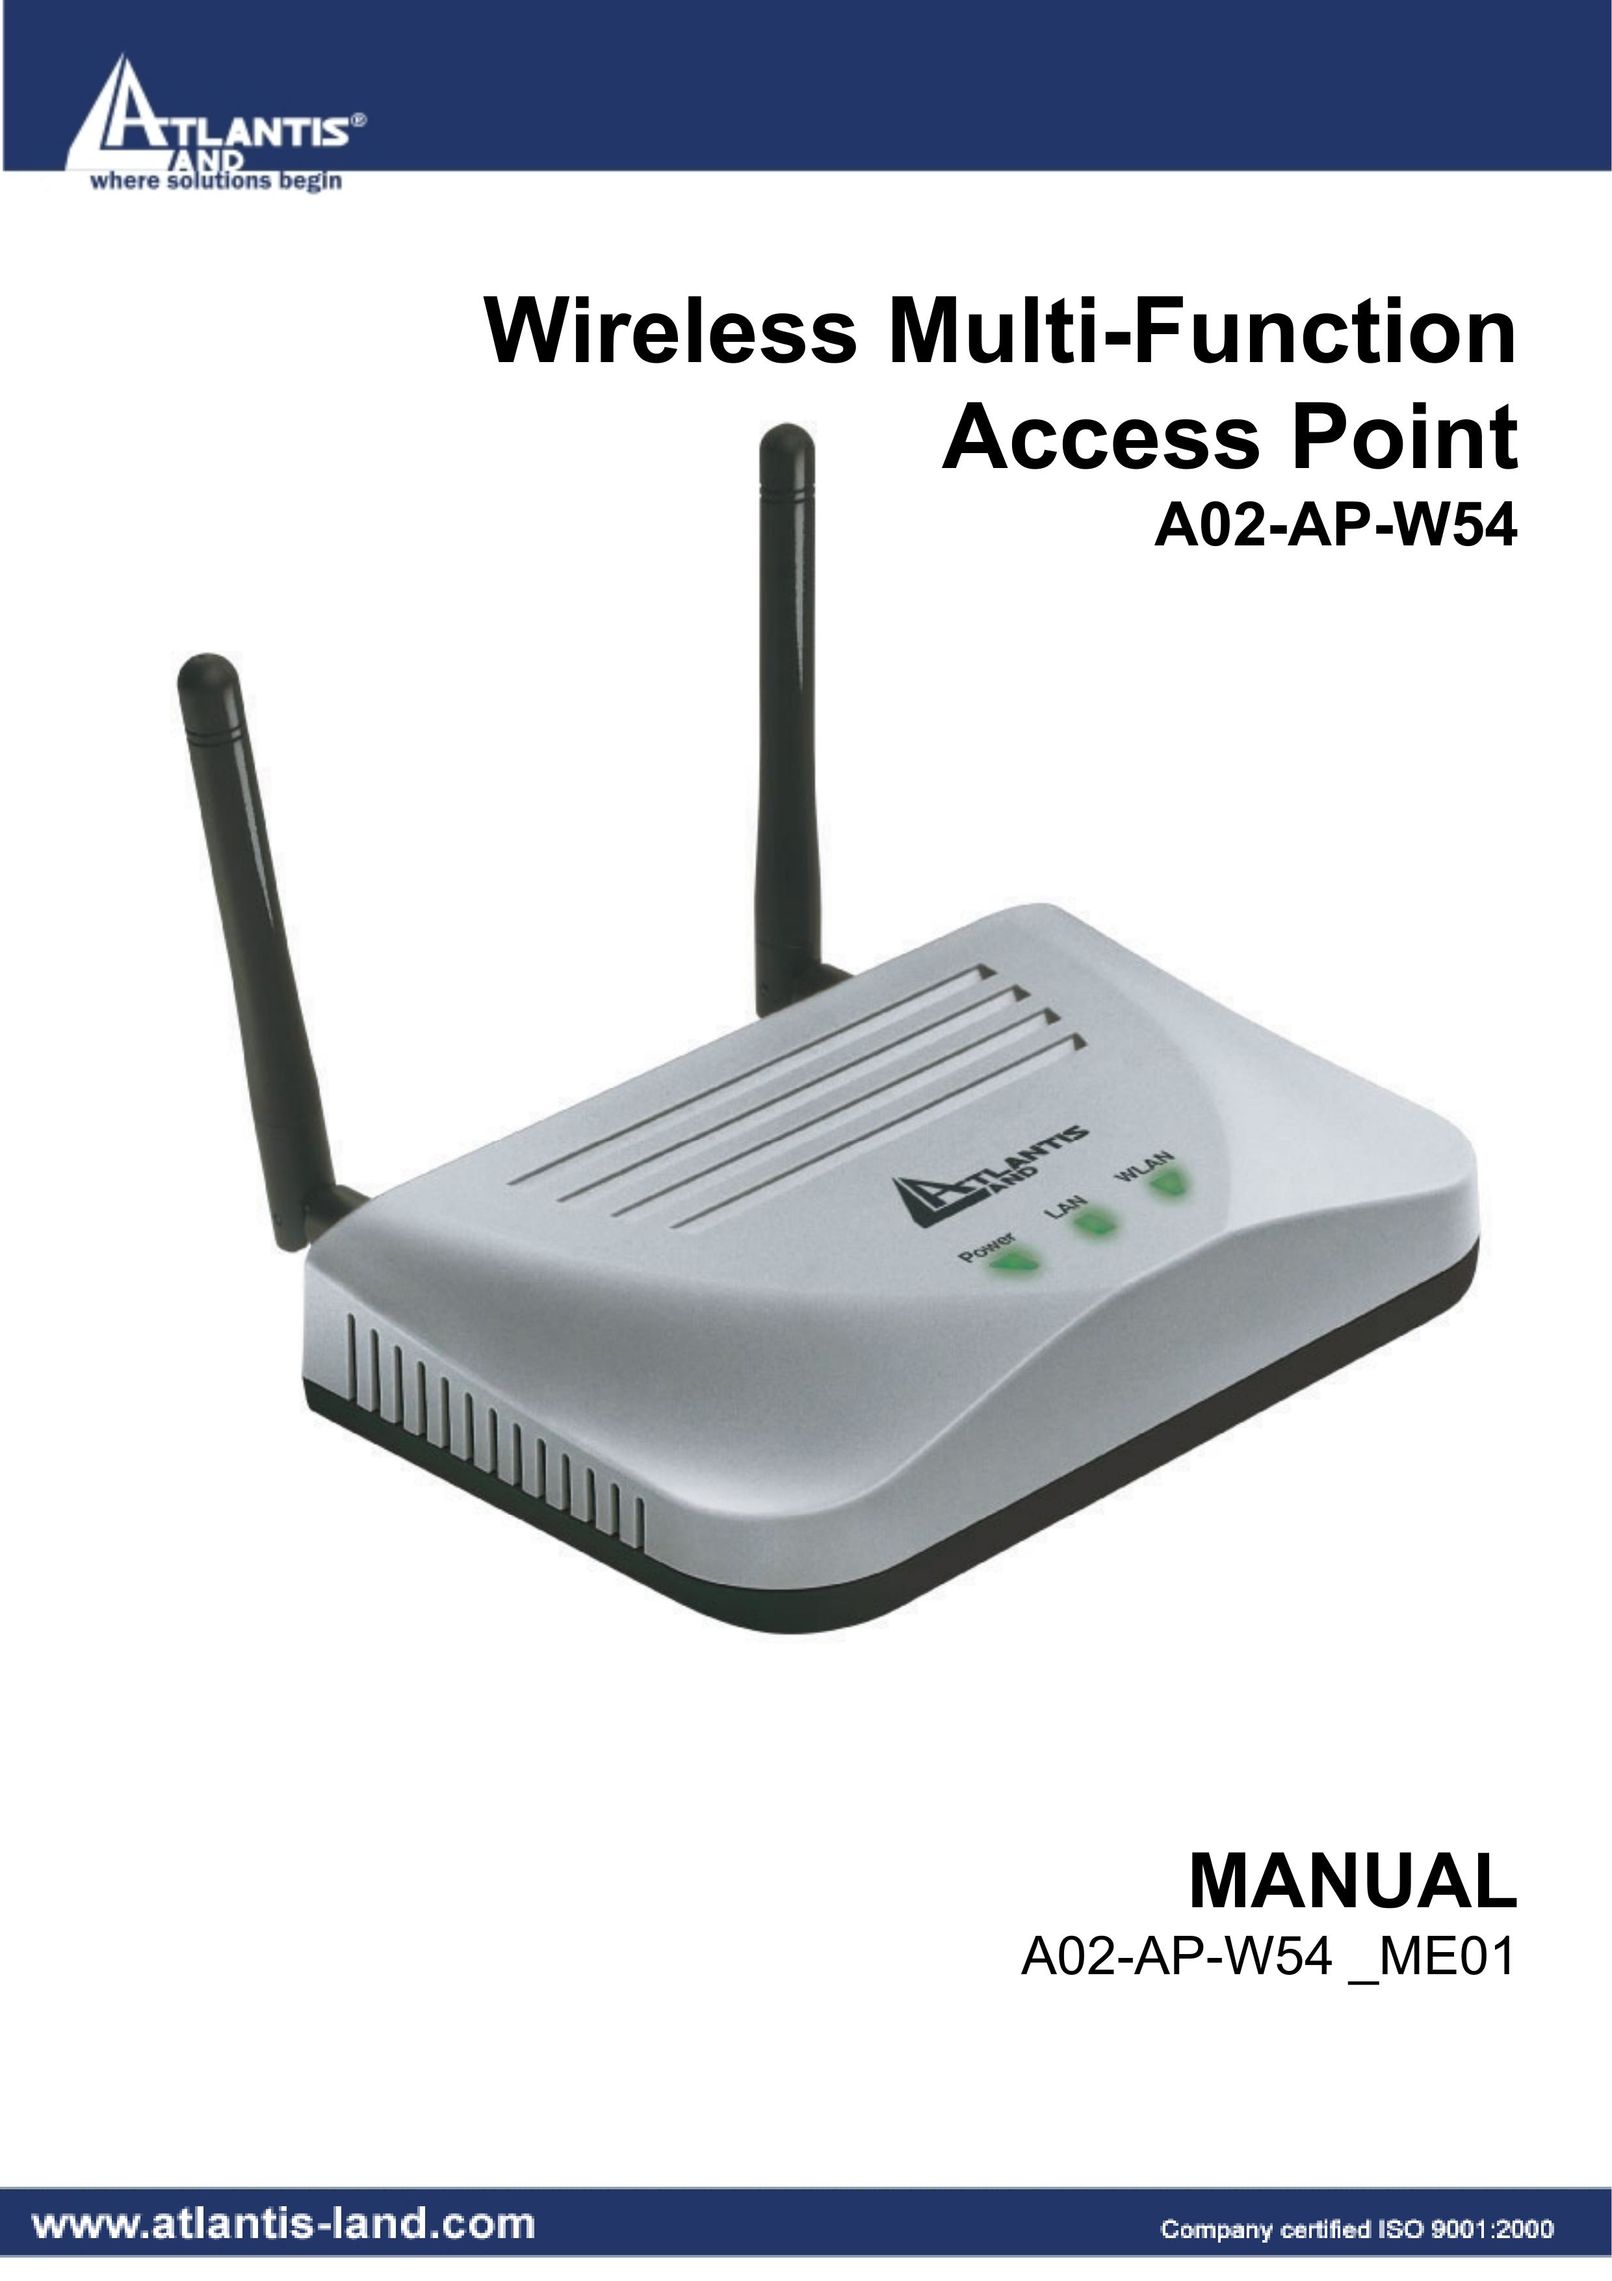 Atlantis Land Wireless Multi-Function Access Point Router User Manual